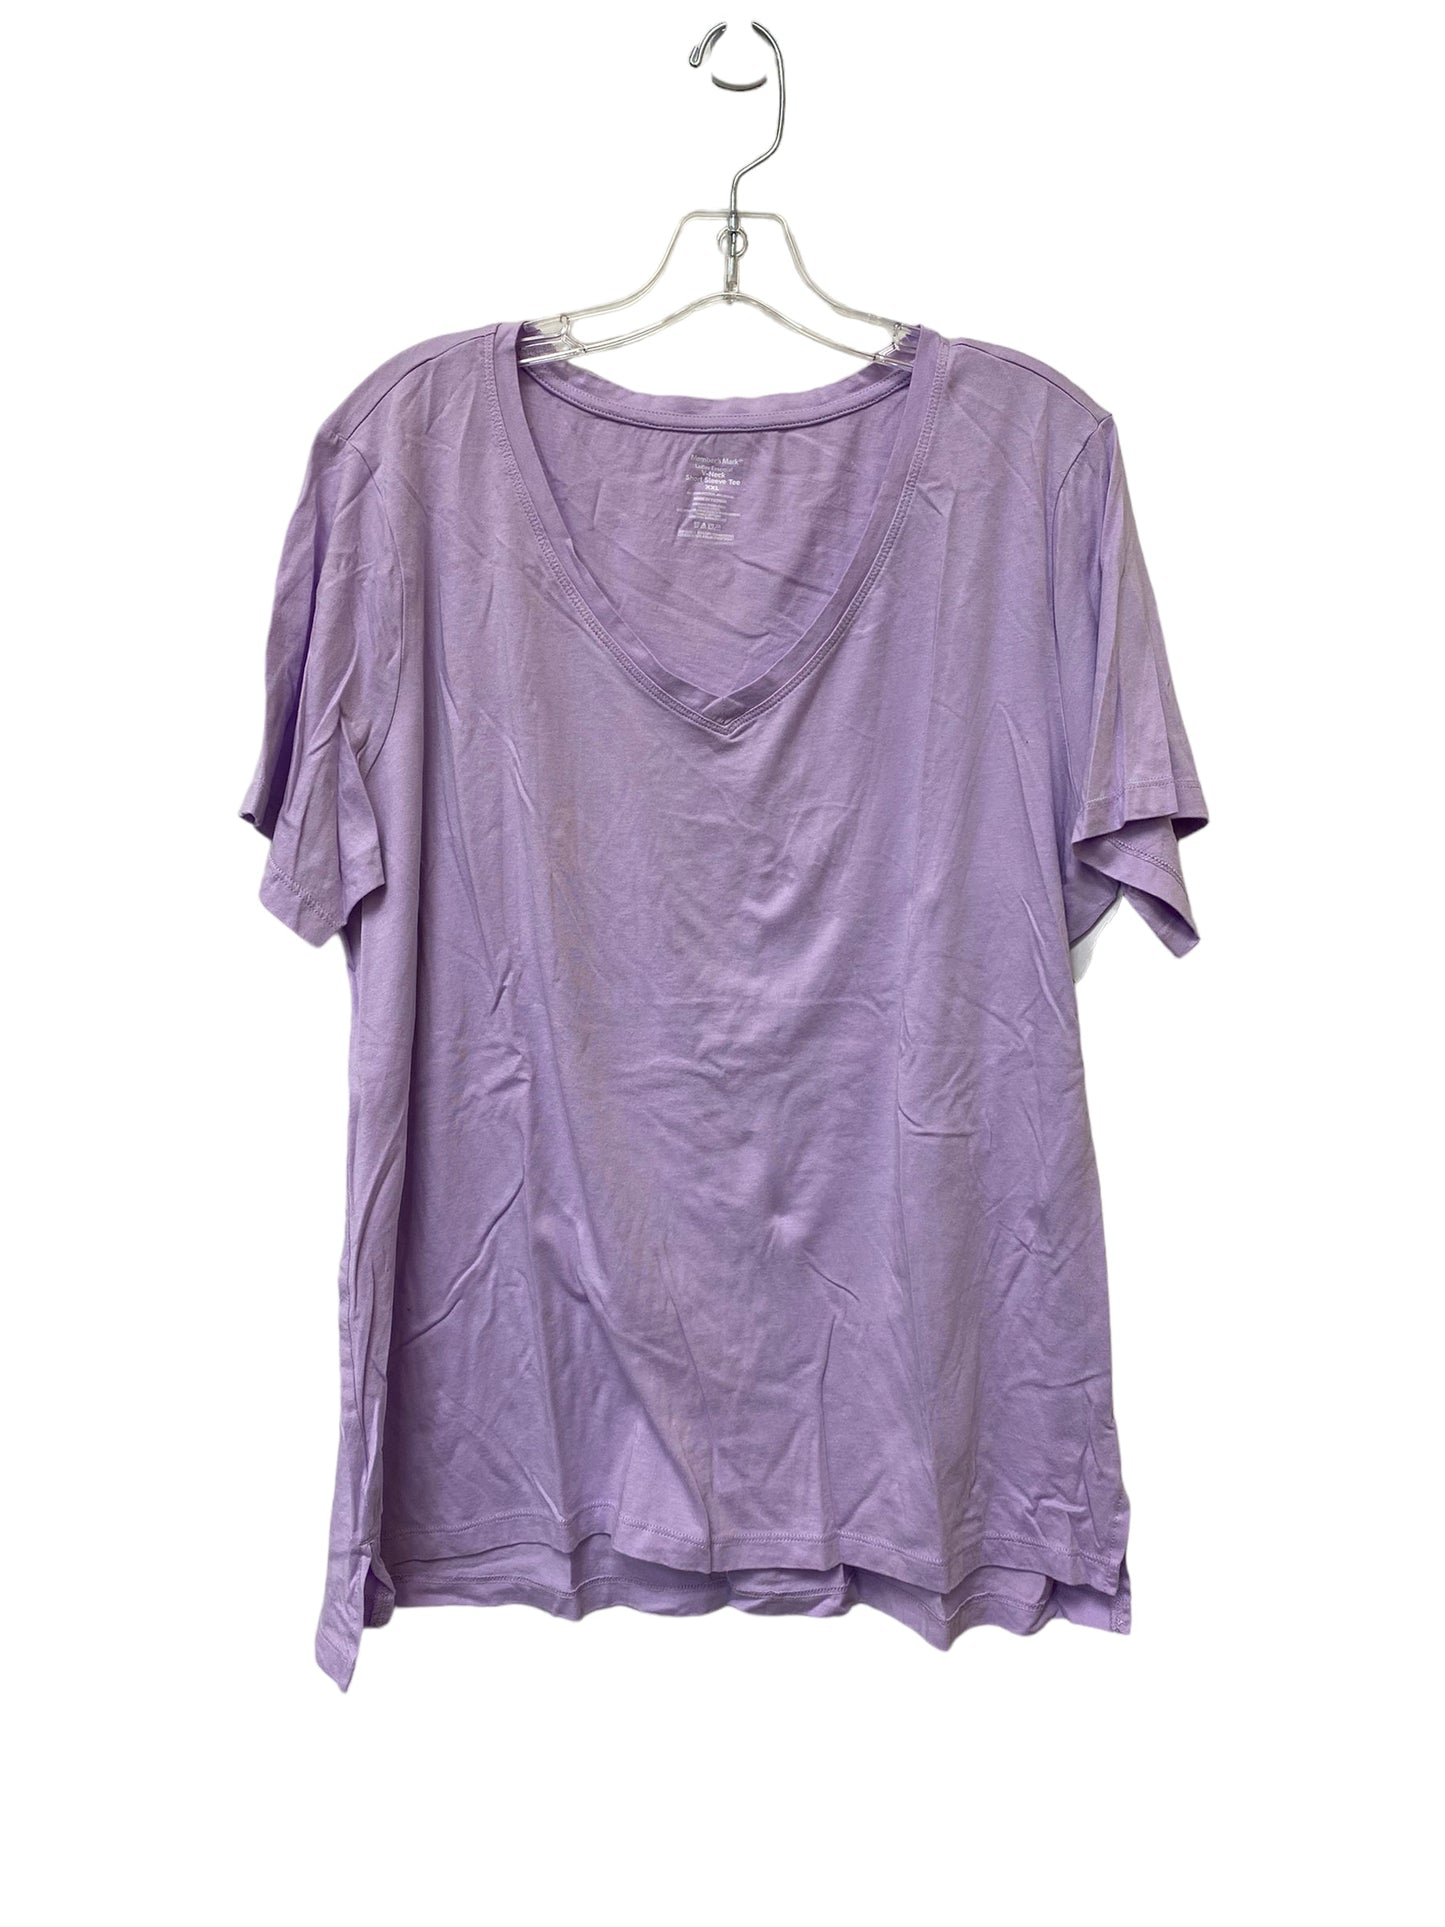 Top Short Sleeve Basic By Clothes Mentor  Size: 2x